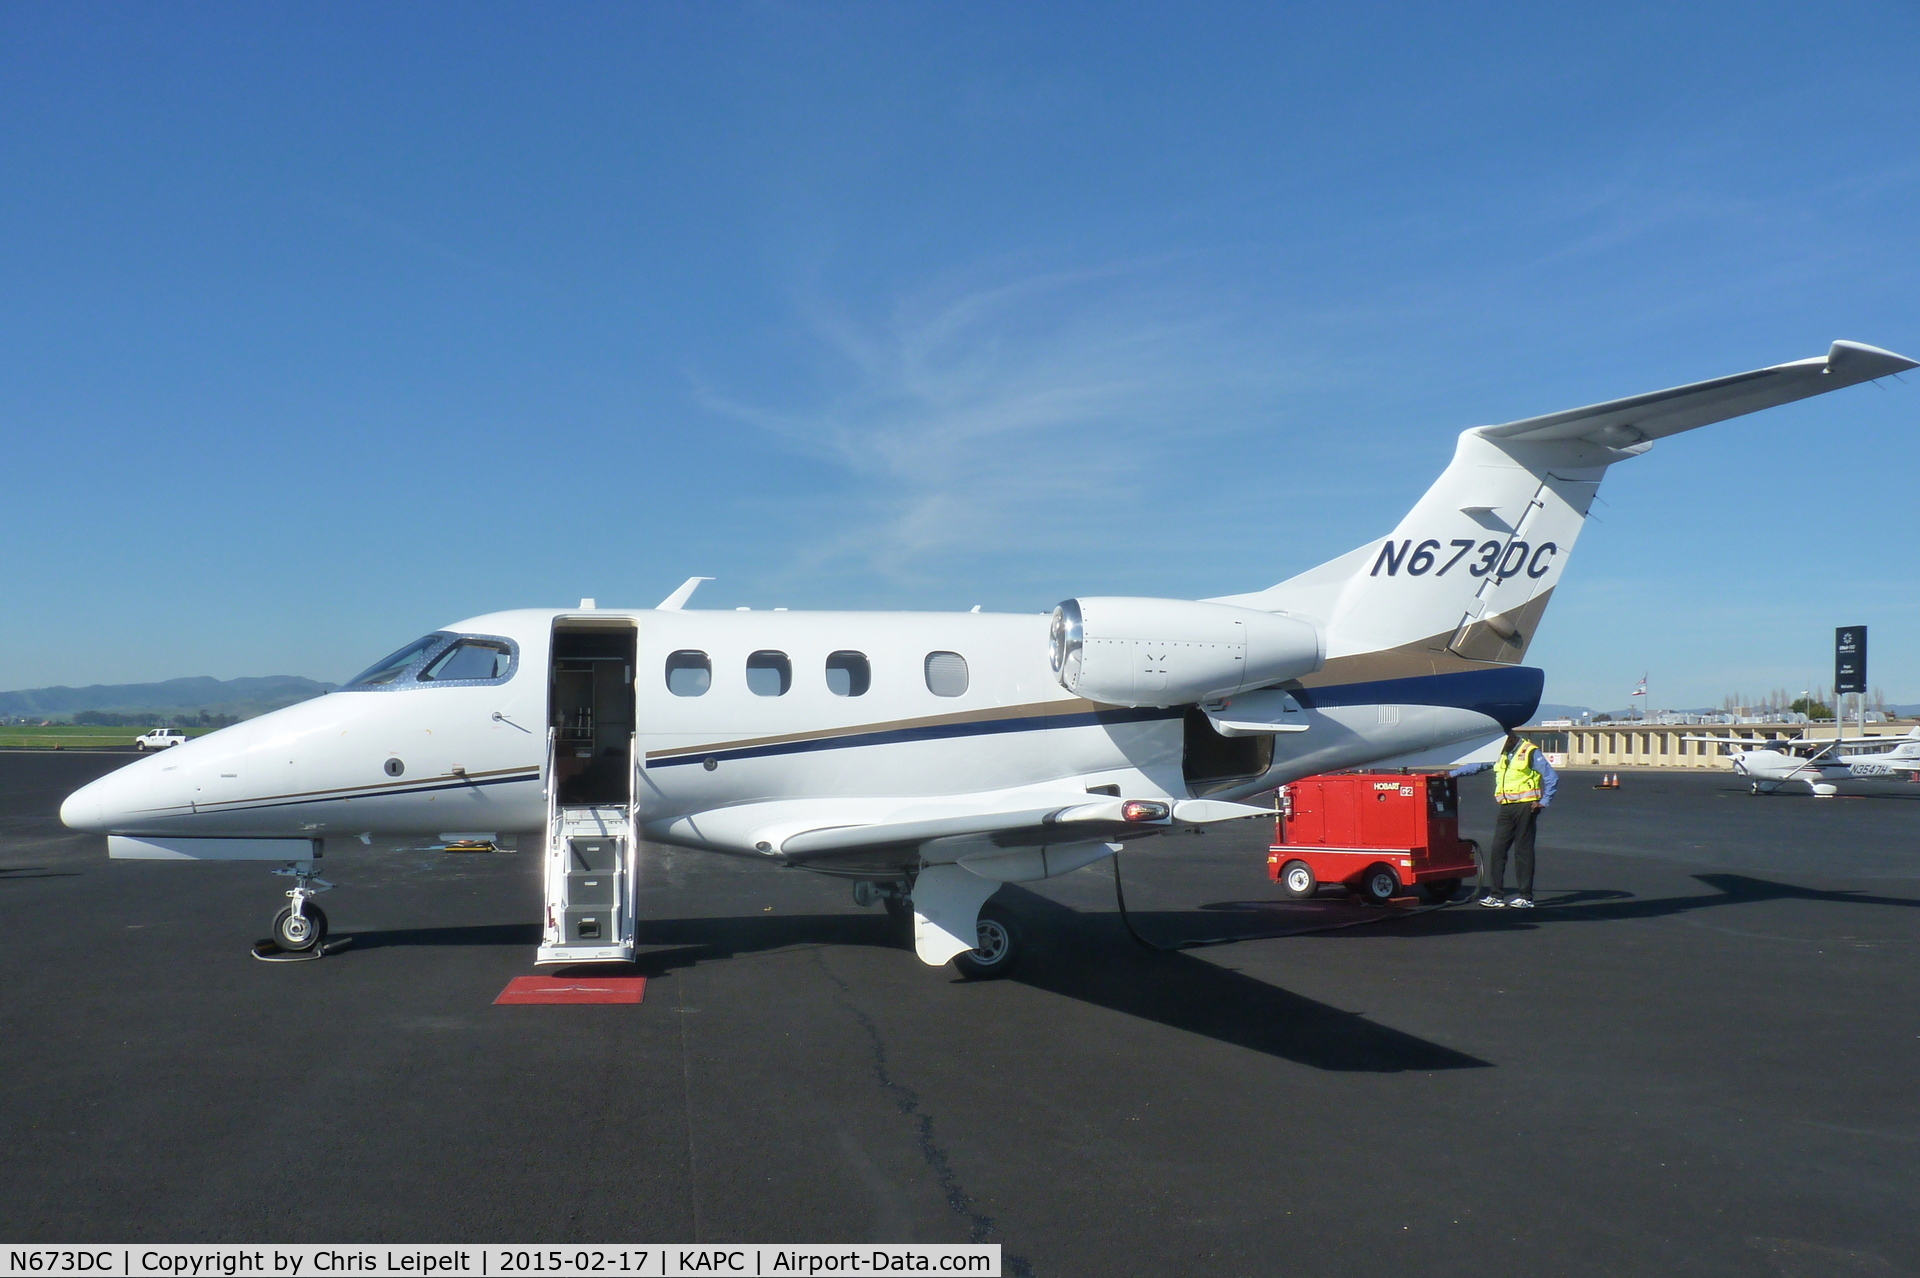 N673DC, 2008 Embraer EMB-500 Phenom 100 C/N 50000010, An Embraer Phenom 300 visiting Napa Airport, CA with the GPU fired up.